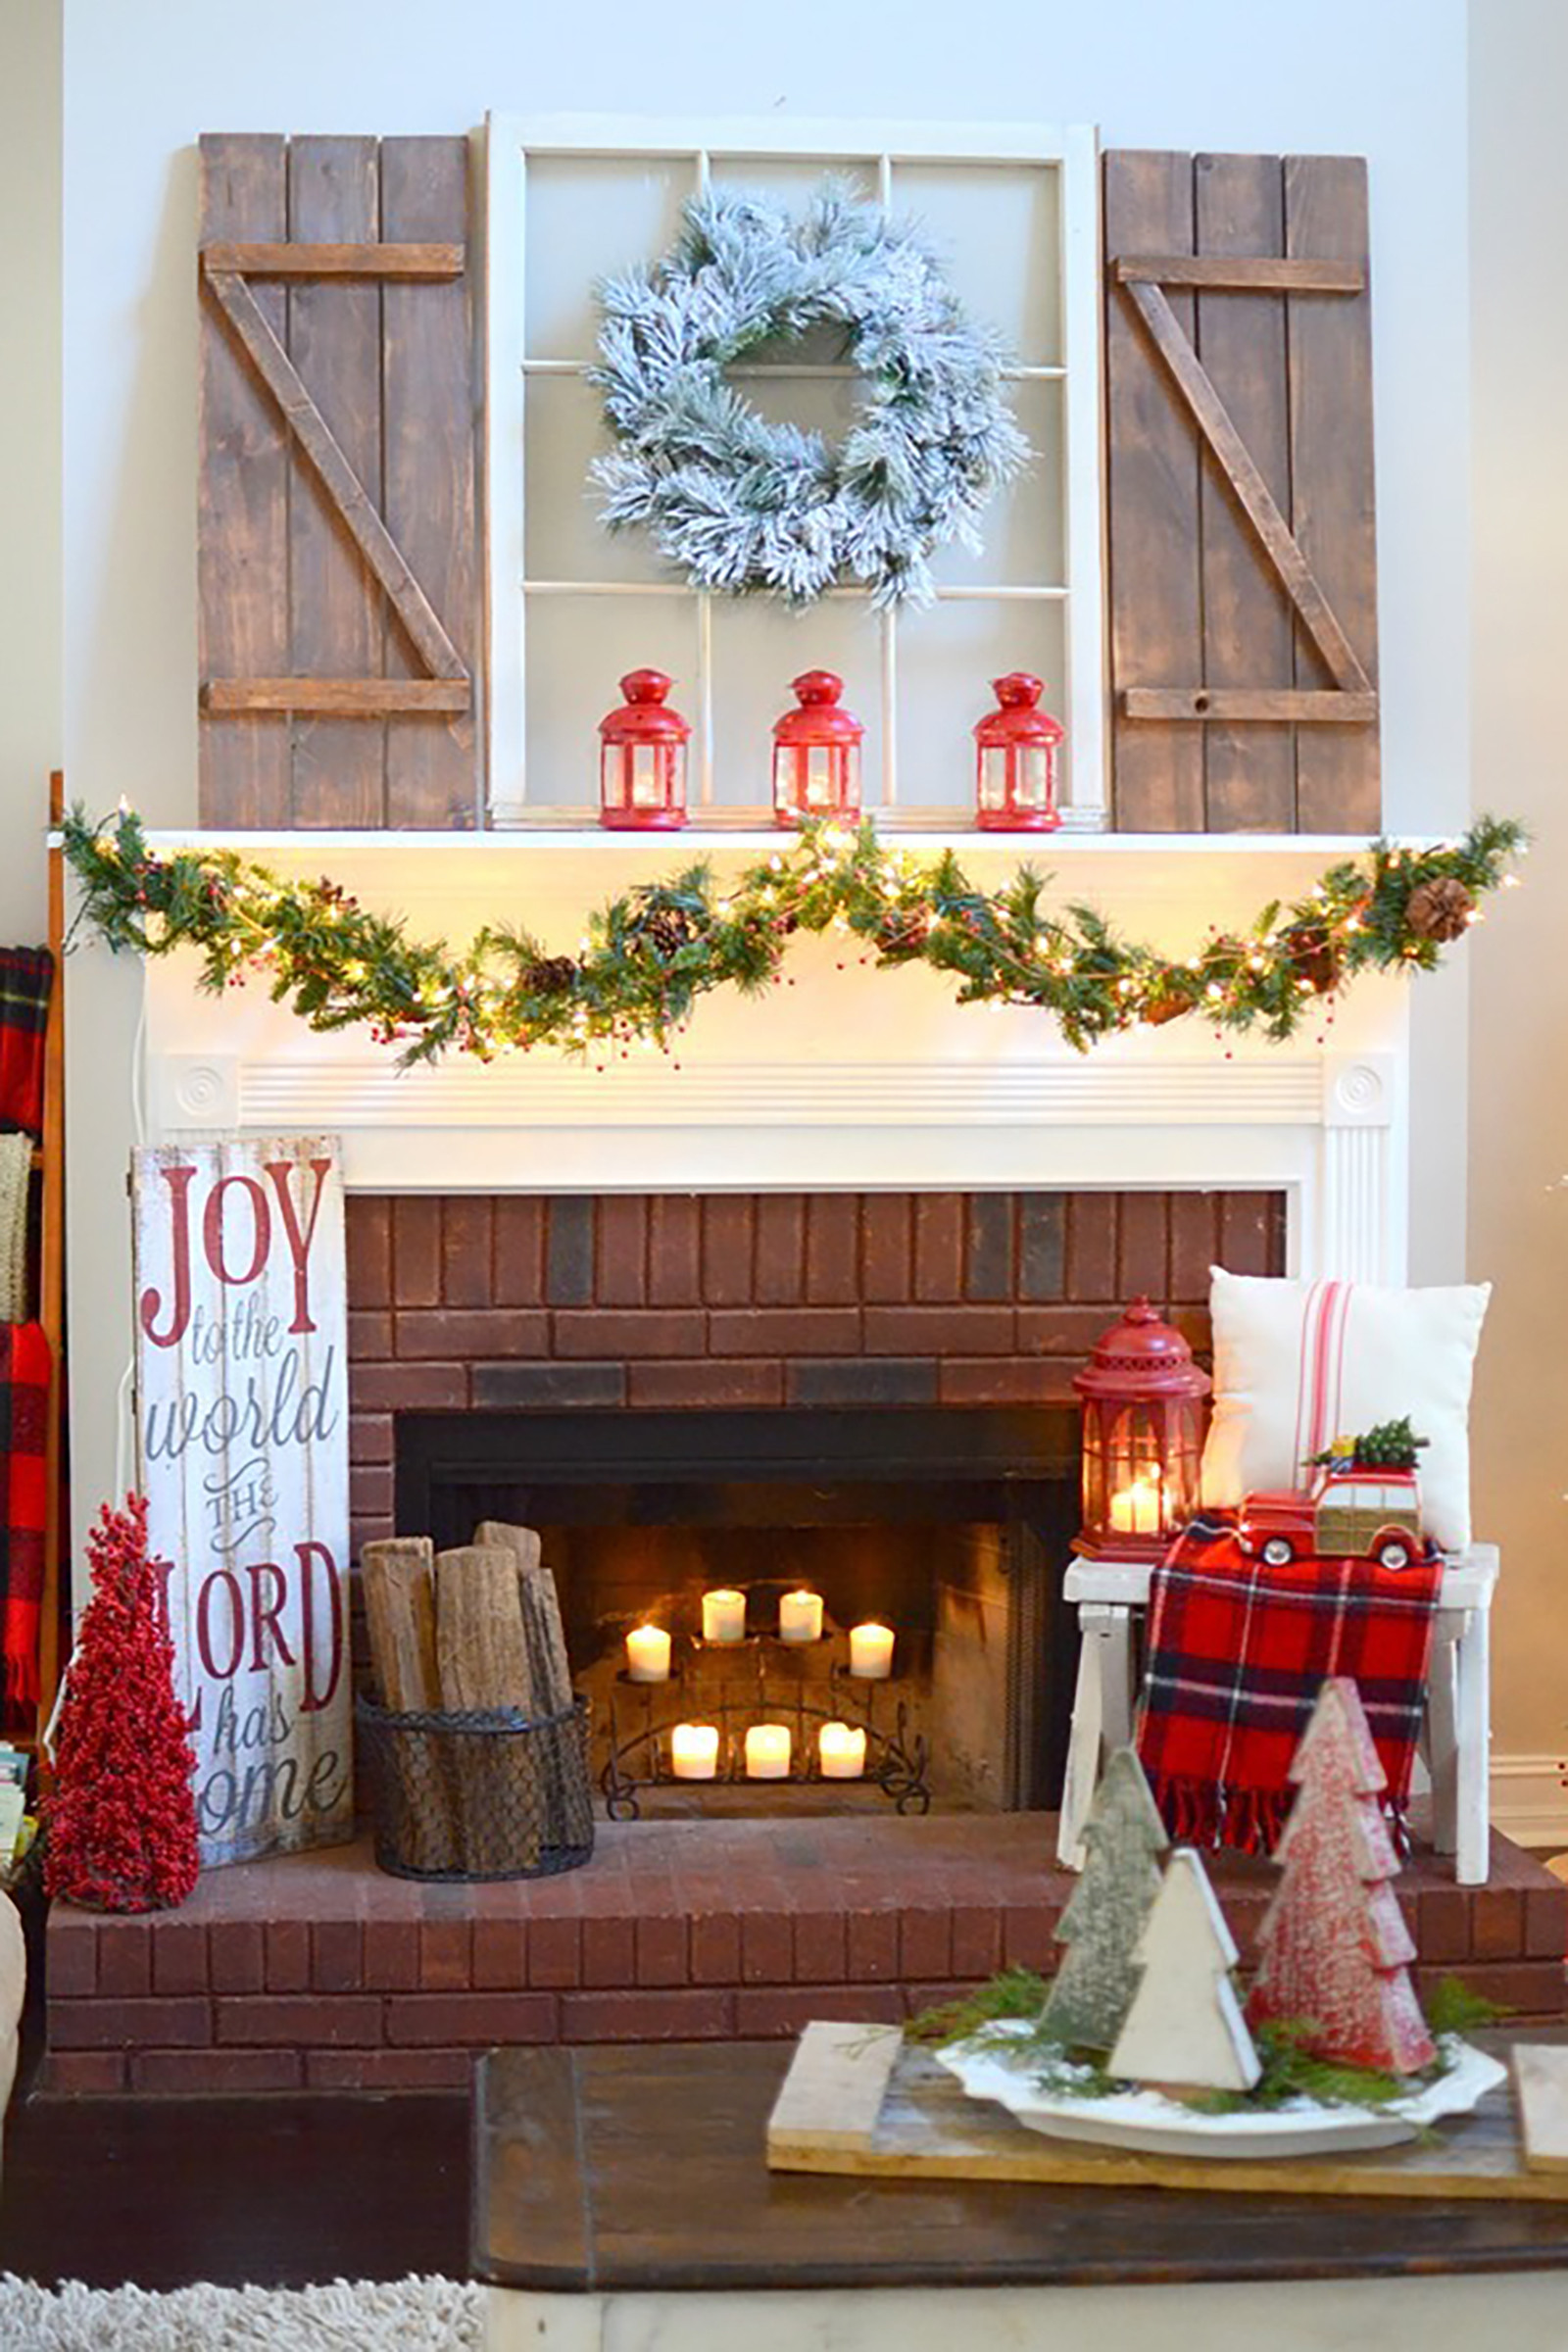 Decorate Fireplace For Christmas
 35 Christmas Mantel Decorations Ideas for Holiday